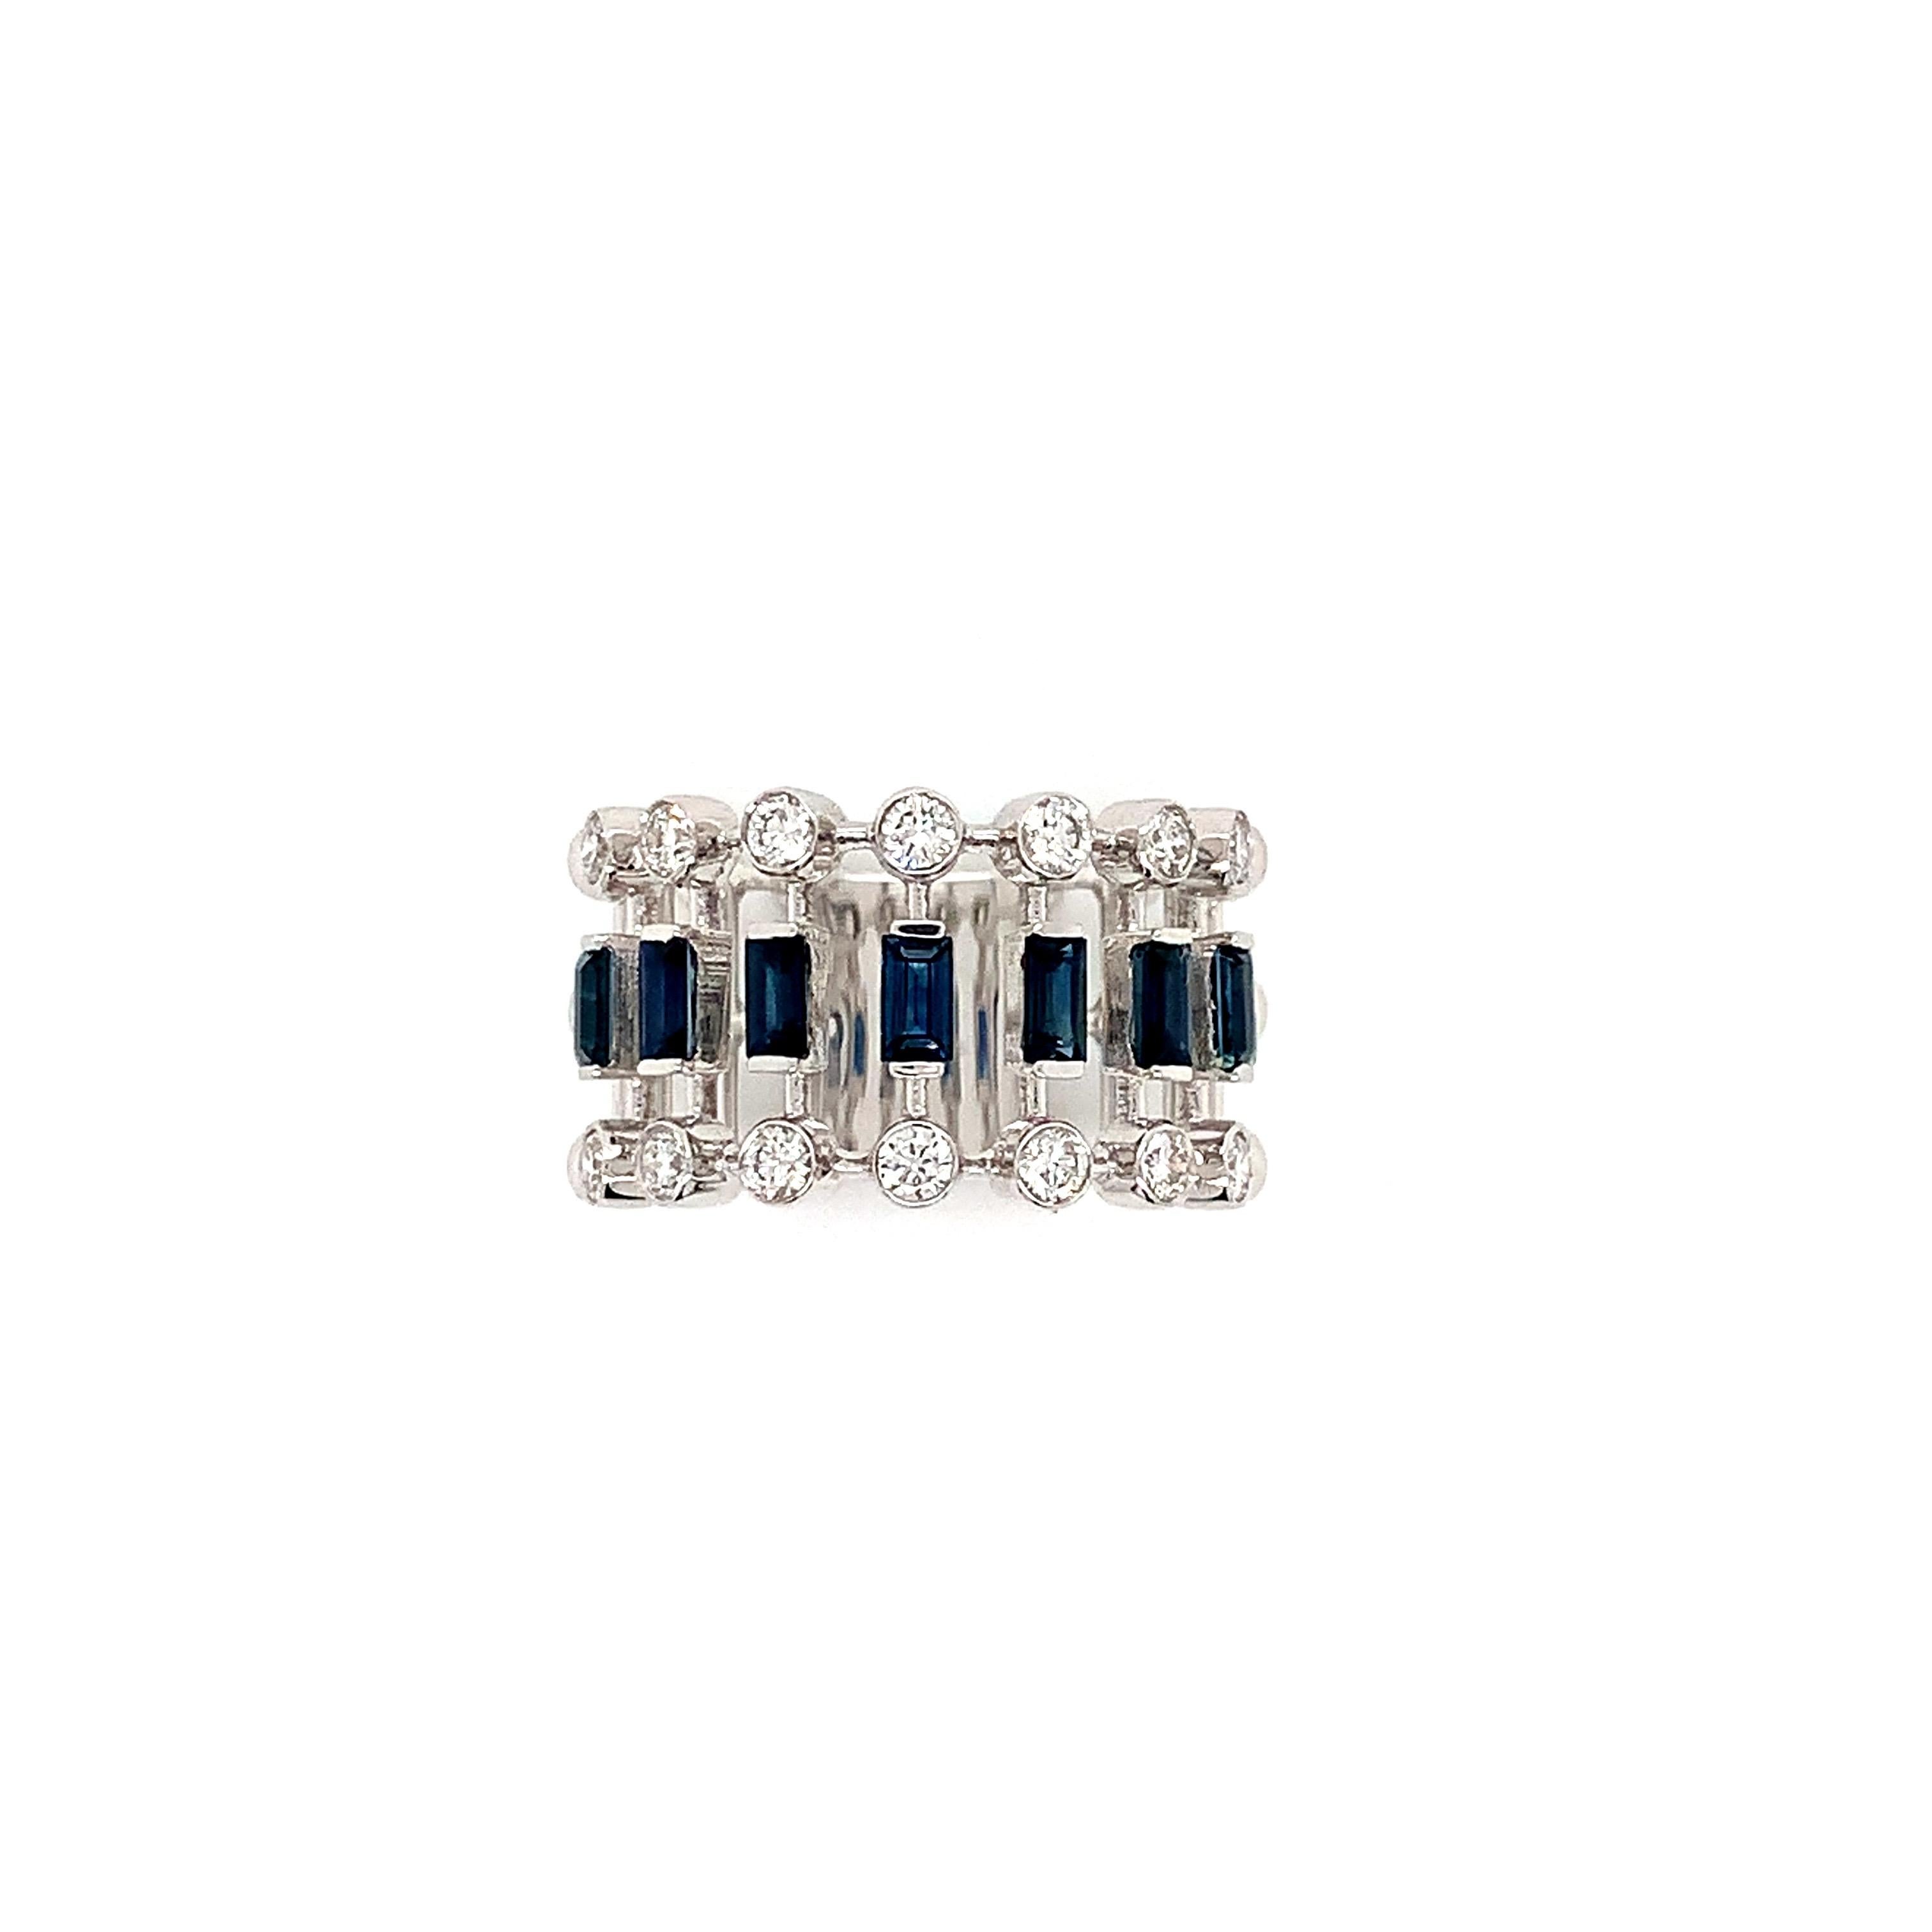 OWN Your Story 14K White Gold Brilliant Diamond and Baguette Sapphire Eternity Band

OWN Your Story brings its 3 generations of family tradition and unparalleled experience with 14K gold, diamonds, and gemstones to create high-level jewelry